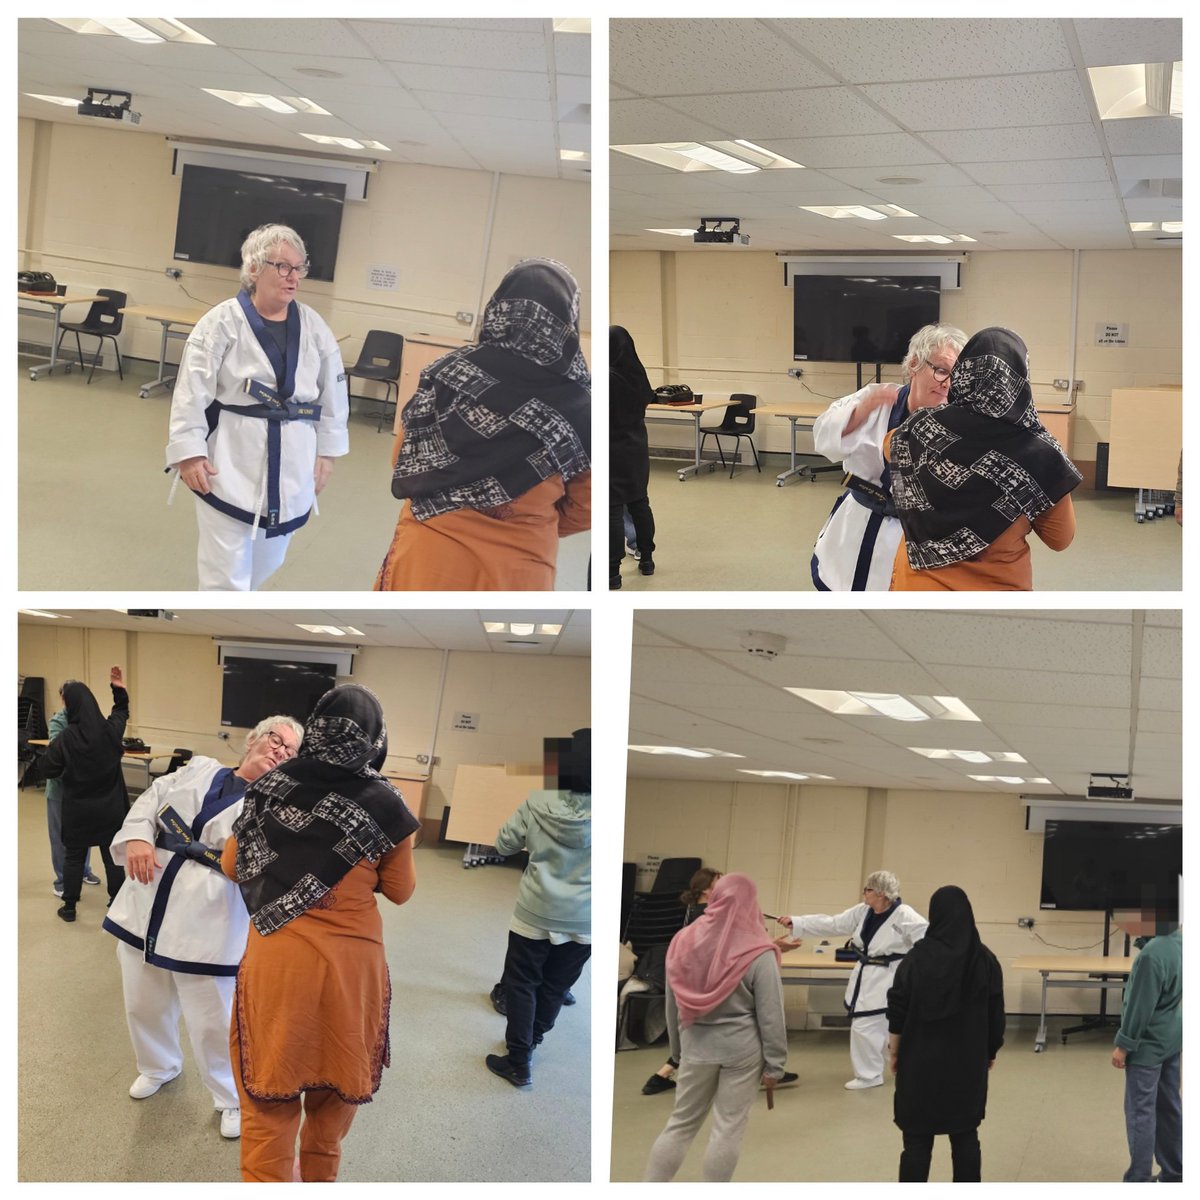 A fantastic start to our #SelfDefence Class. Big thankyou to our amazing instructor @PBunksy. Discussion about safety, then learning various self-defence moves including knife attack, scarf pull etc. @PennineCareNHS Special thanks to @WeActTogether #OneOldhamFund @glaysherwhite